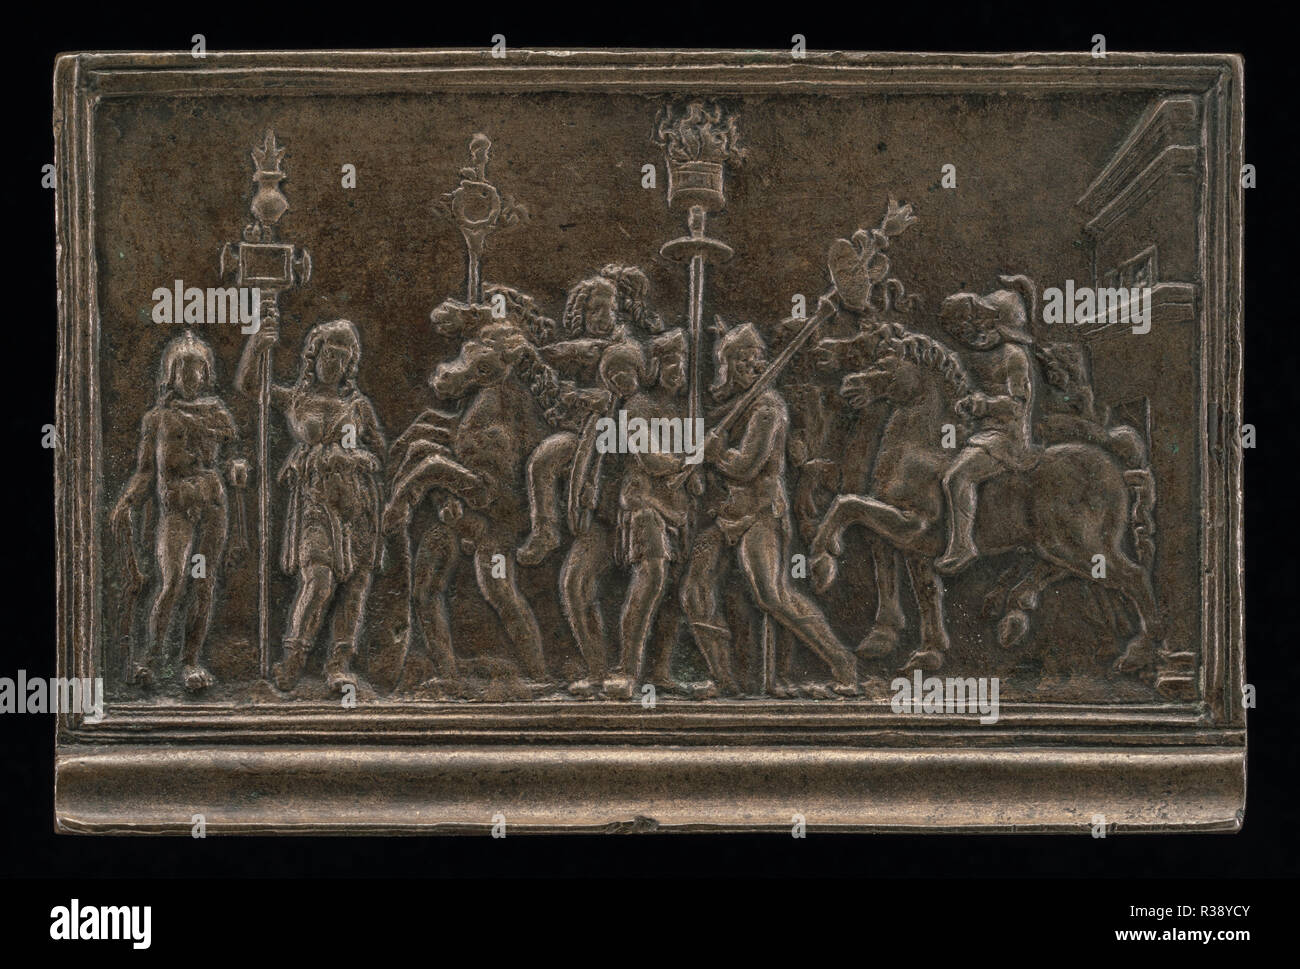 A Triumph. Dated: c. 1500. Dimensions: overall: 5 x 7.6 cm (1 15/16 x 3 in.) gross weight: 69 gr. Medium: bronze. Museum: National Gallery of Art, Washington DC. Author: North Italian 16th Century. Stock Photo